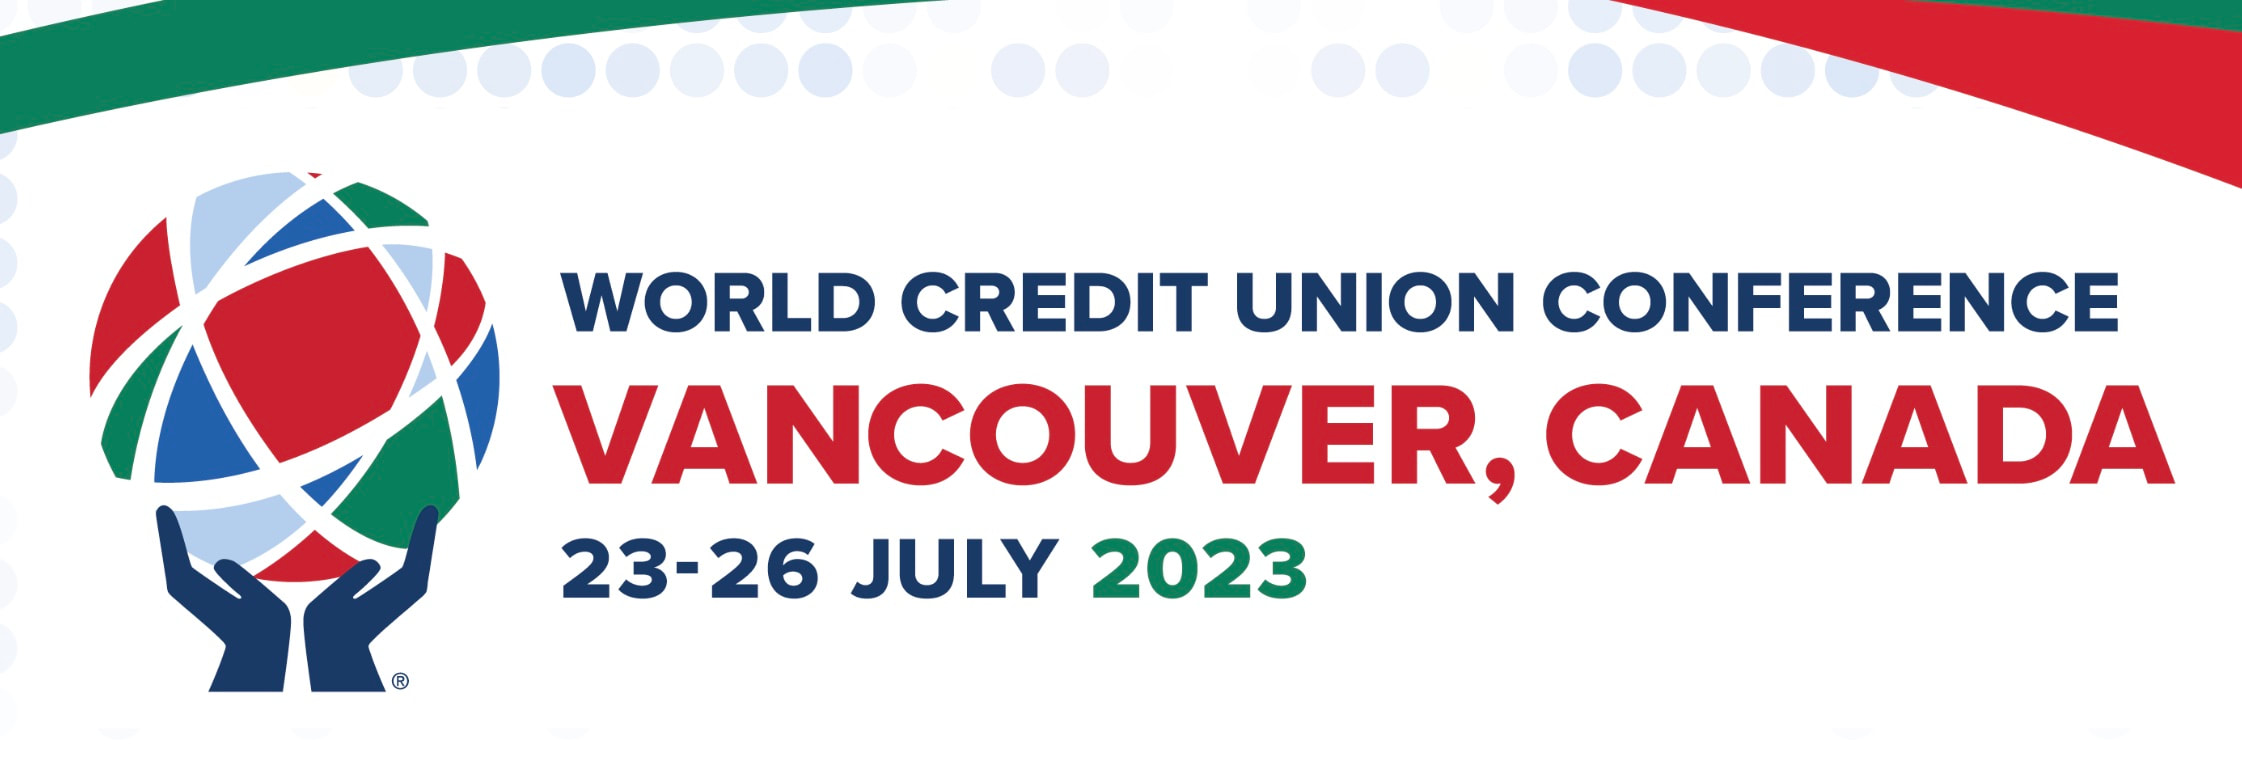 2023 World Credit Union Conference in Vancouver